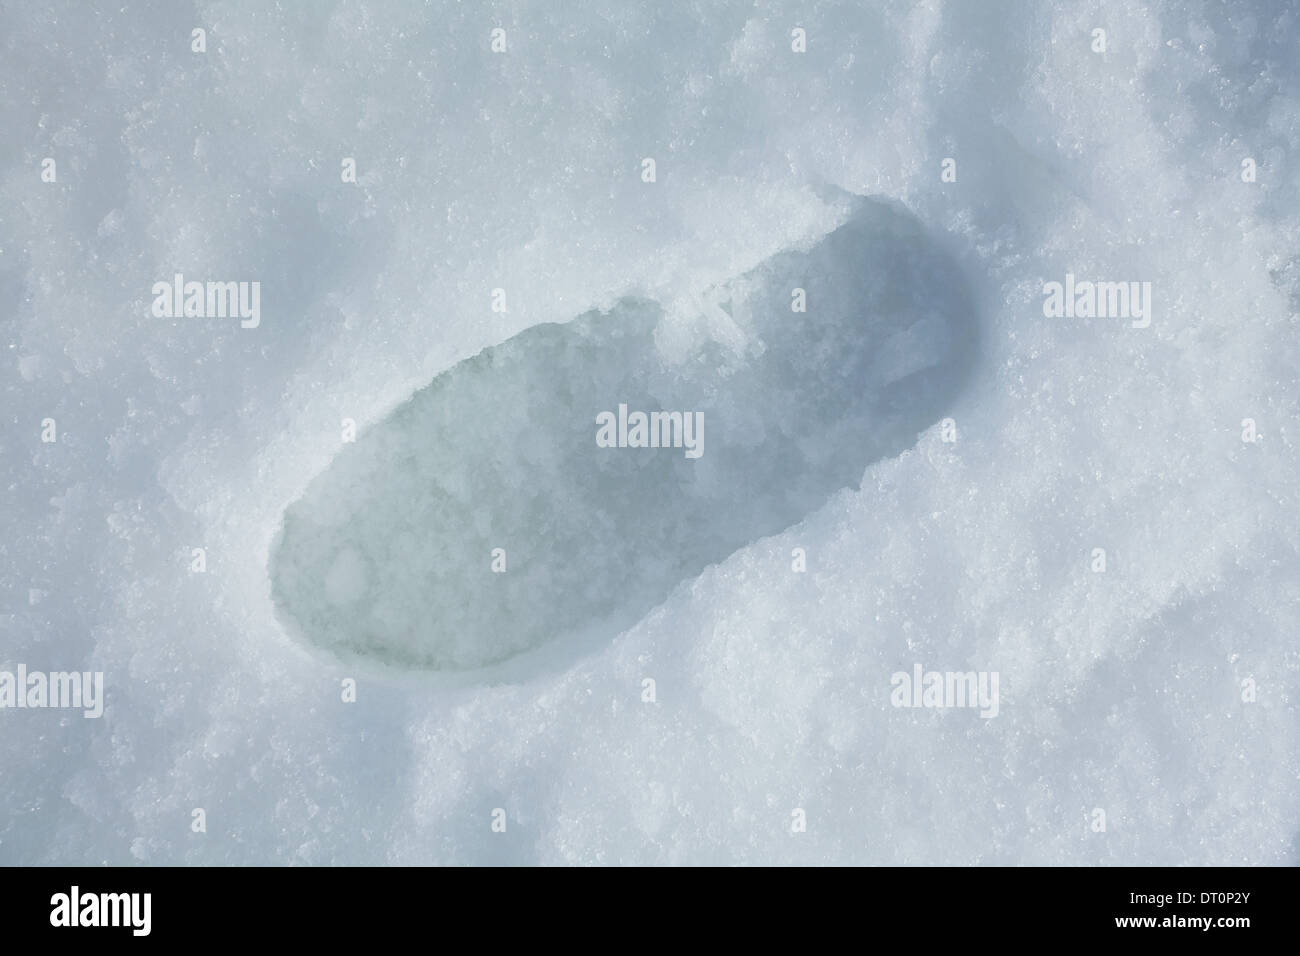 snow footprint above concept one Stock Photo